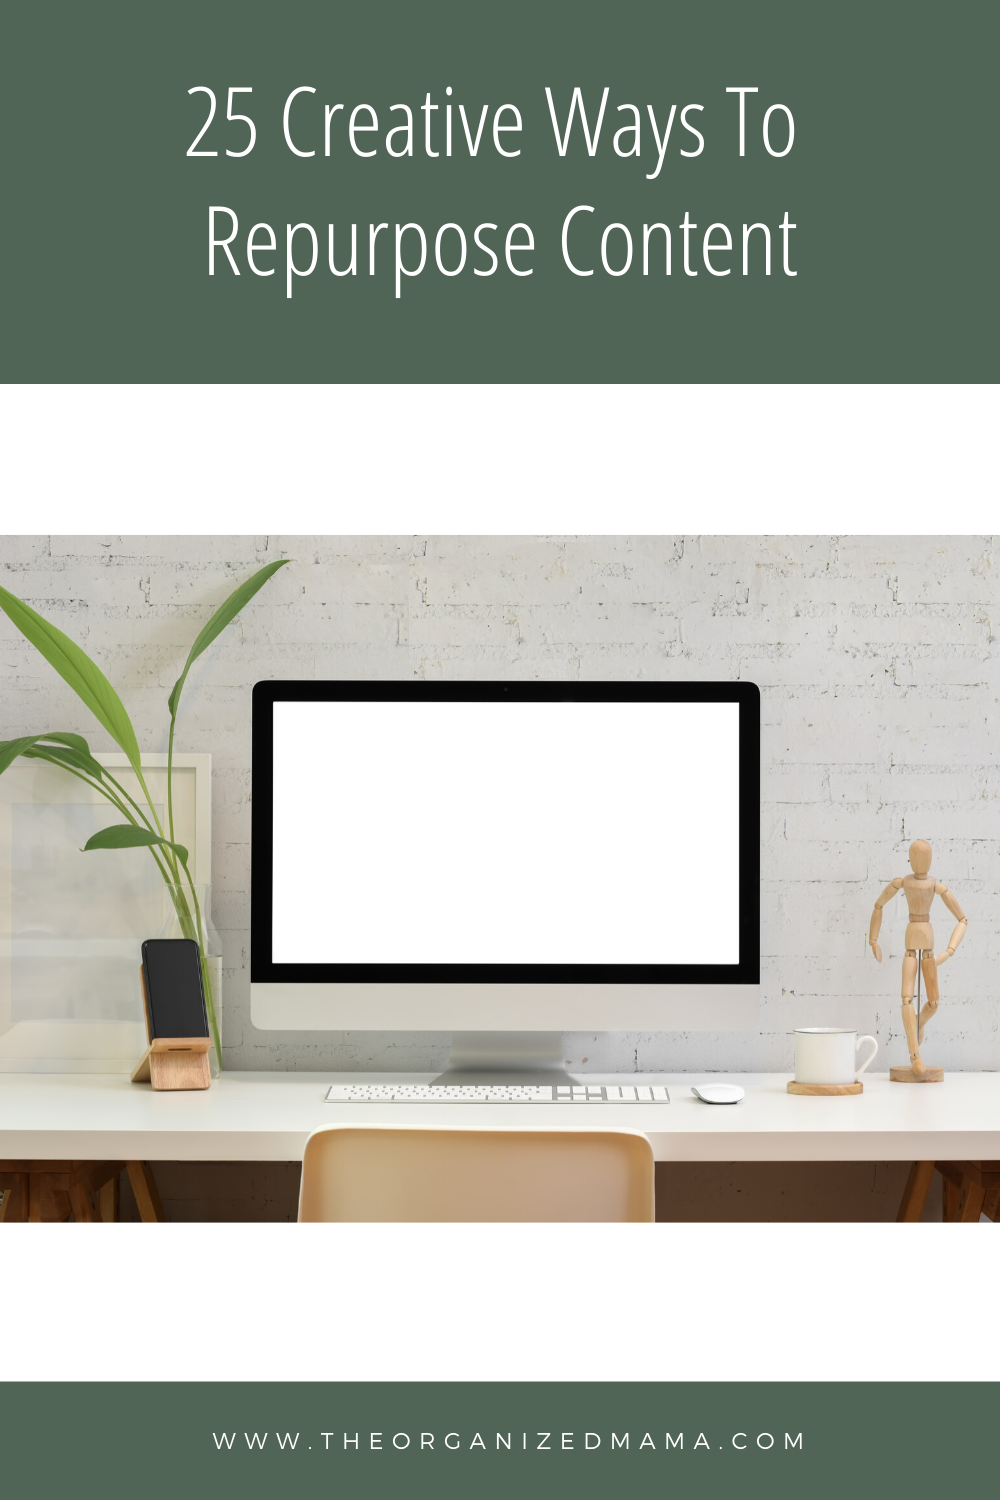 25 creative ways to repurpose content overlay with computer and desk